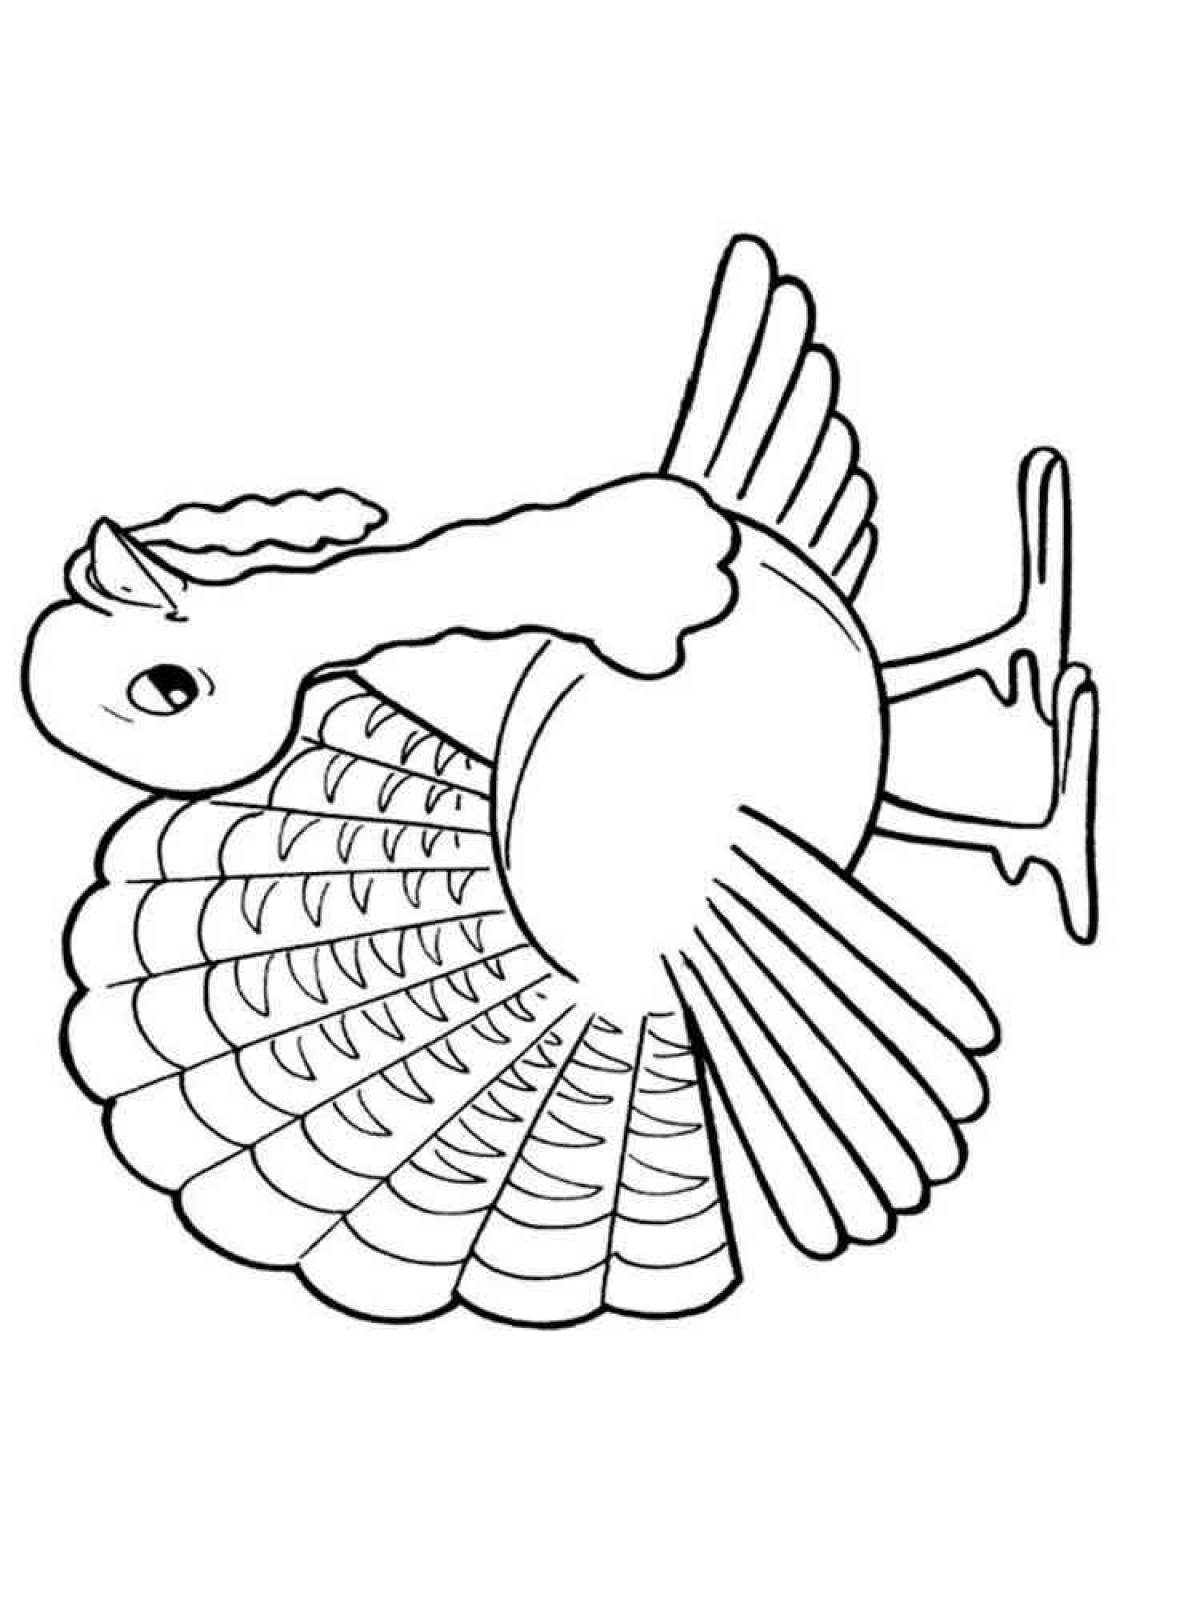 Happy turkey coloring pages for kids